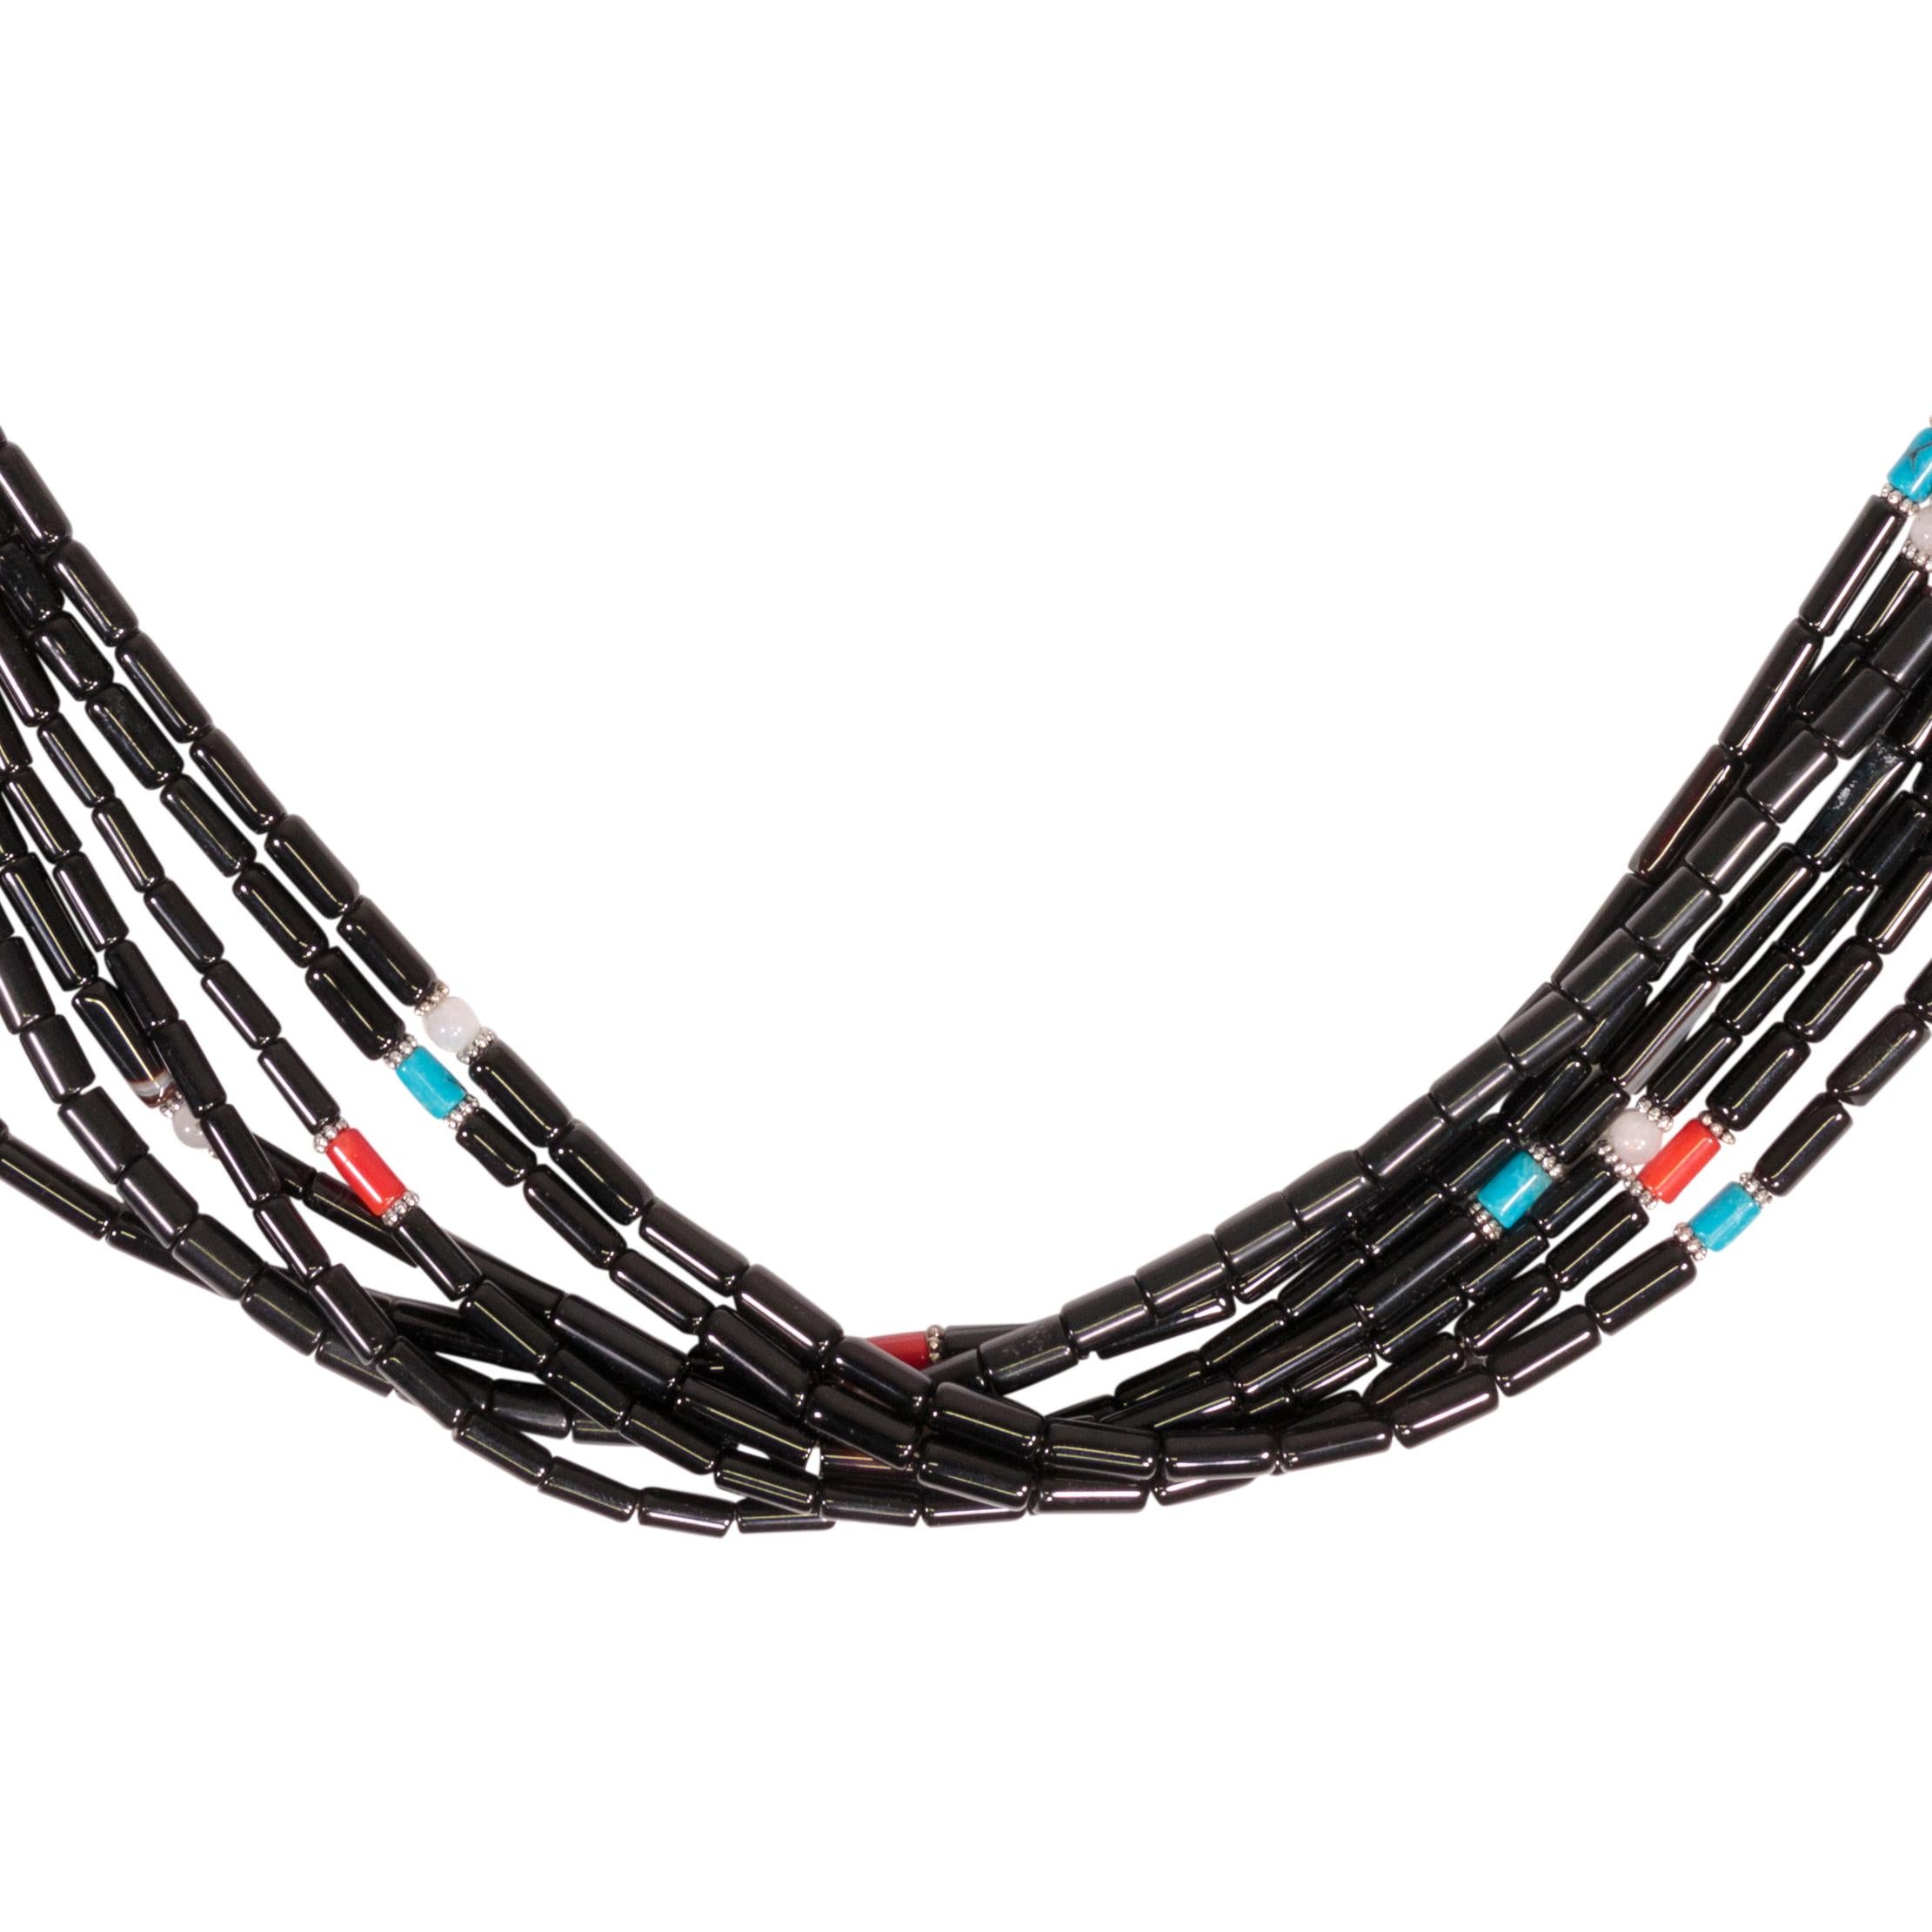 Multi-strand necklace signed by Tommy Singer. Onyx tube beads with accent beads of silver and 14k gold, turquoise, turquoise and coral. 

Tommy Singer (1940 - May 31, 2014) was a World Famous Navajo Silversmith and his distinct style of Indian